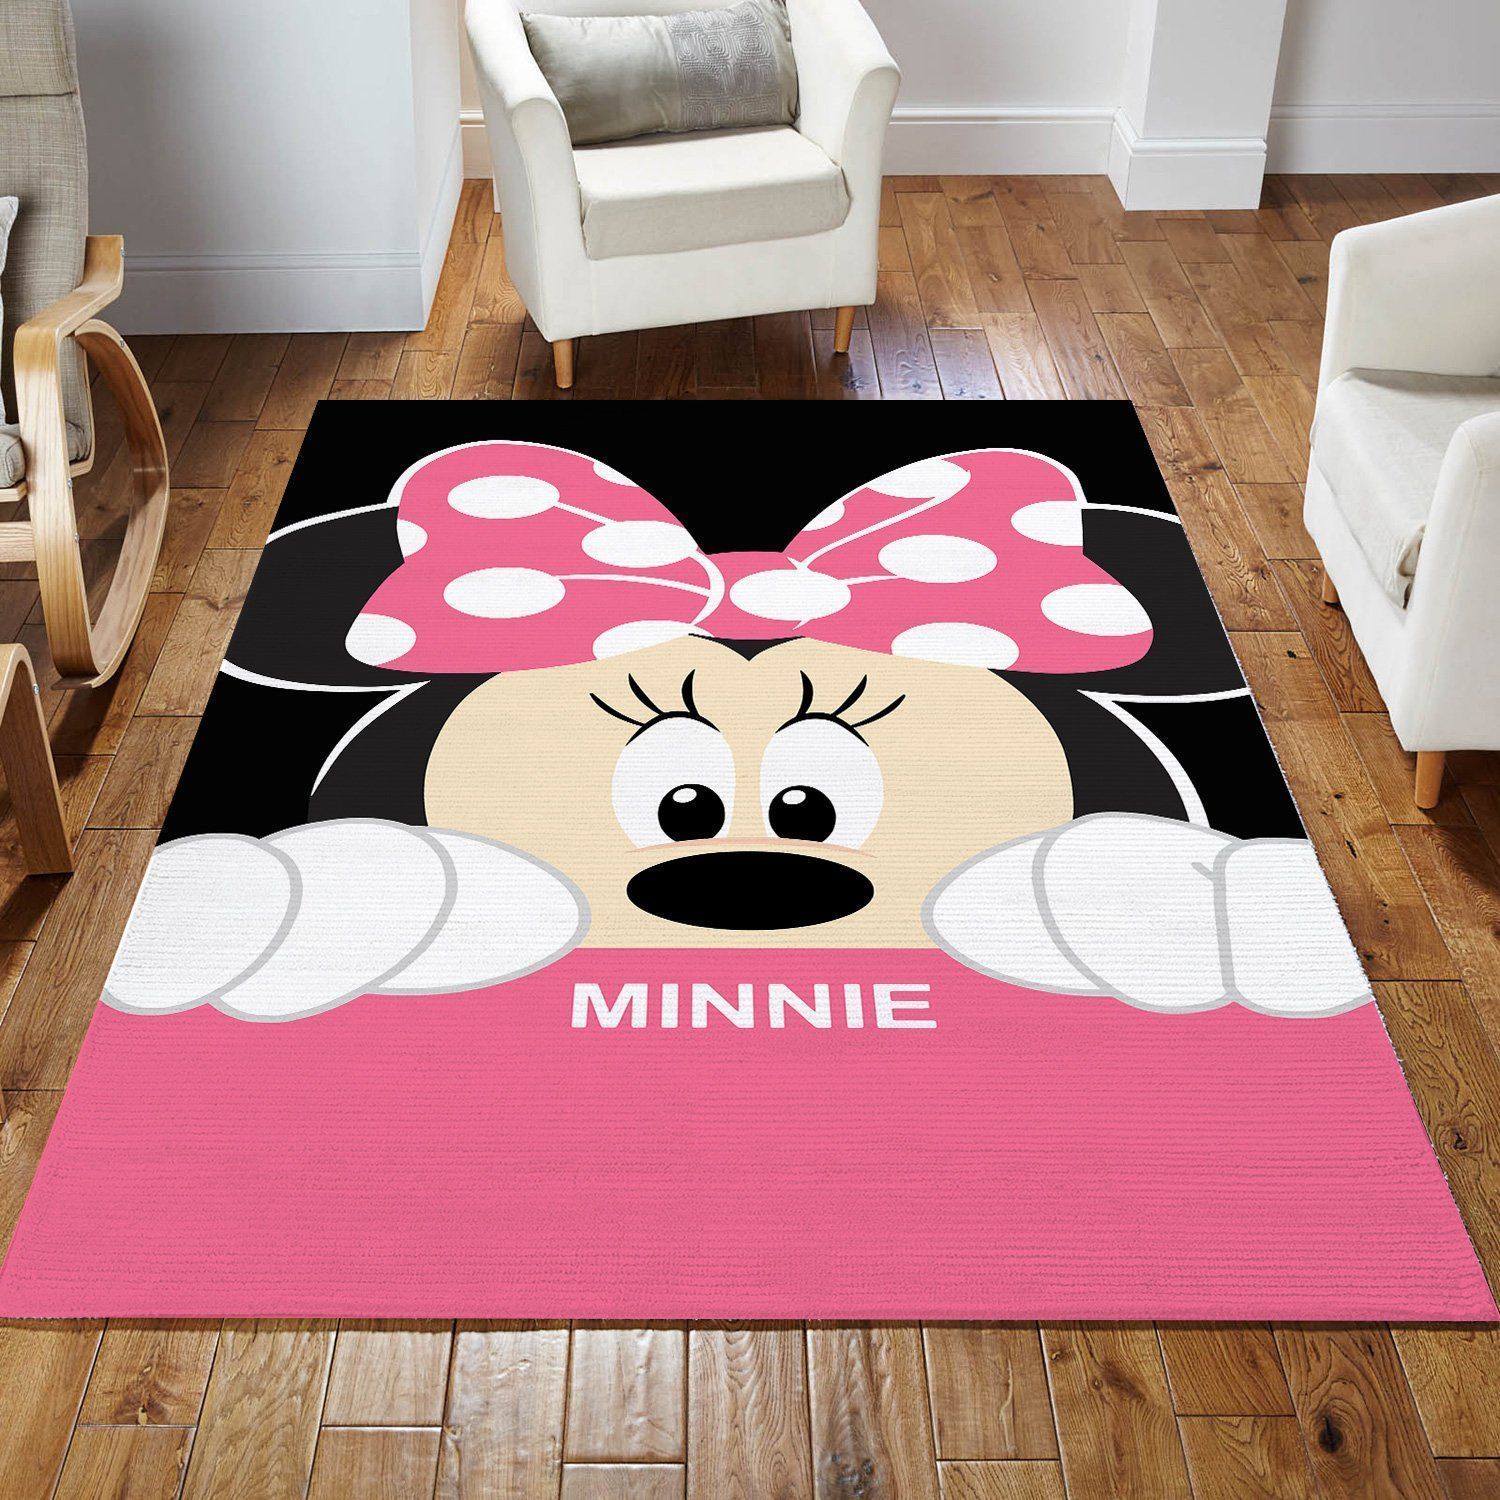 Minnie Mouse Area Rugs Disney Movies Living Room Carpet Local Brands Floor Decor The US Decor - Indoor Outdoor Rugs 3